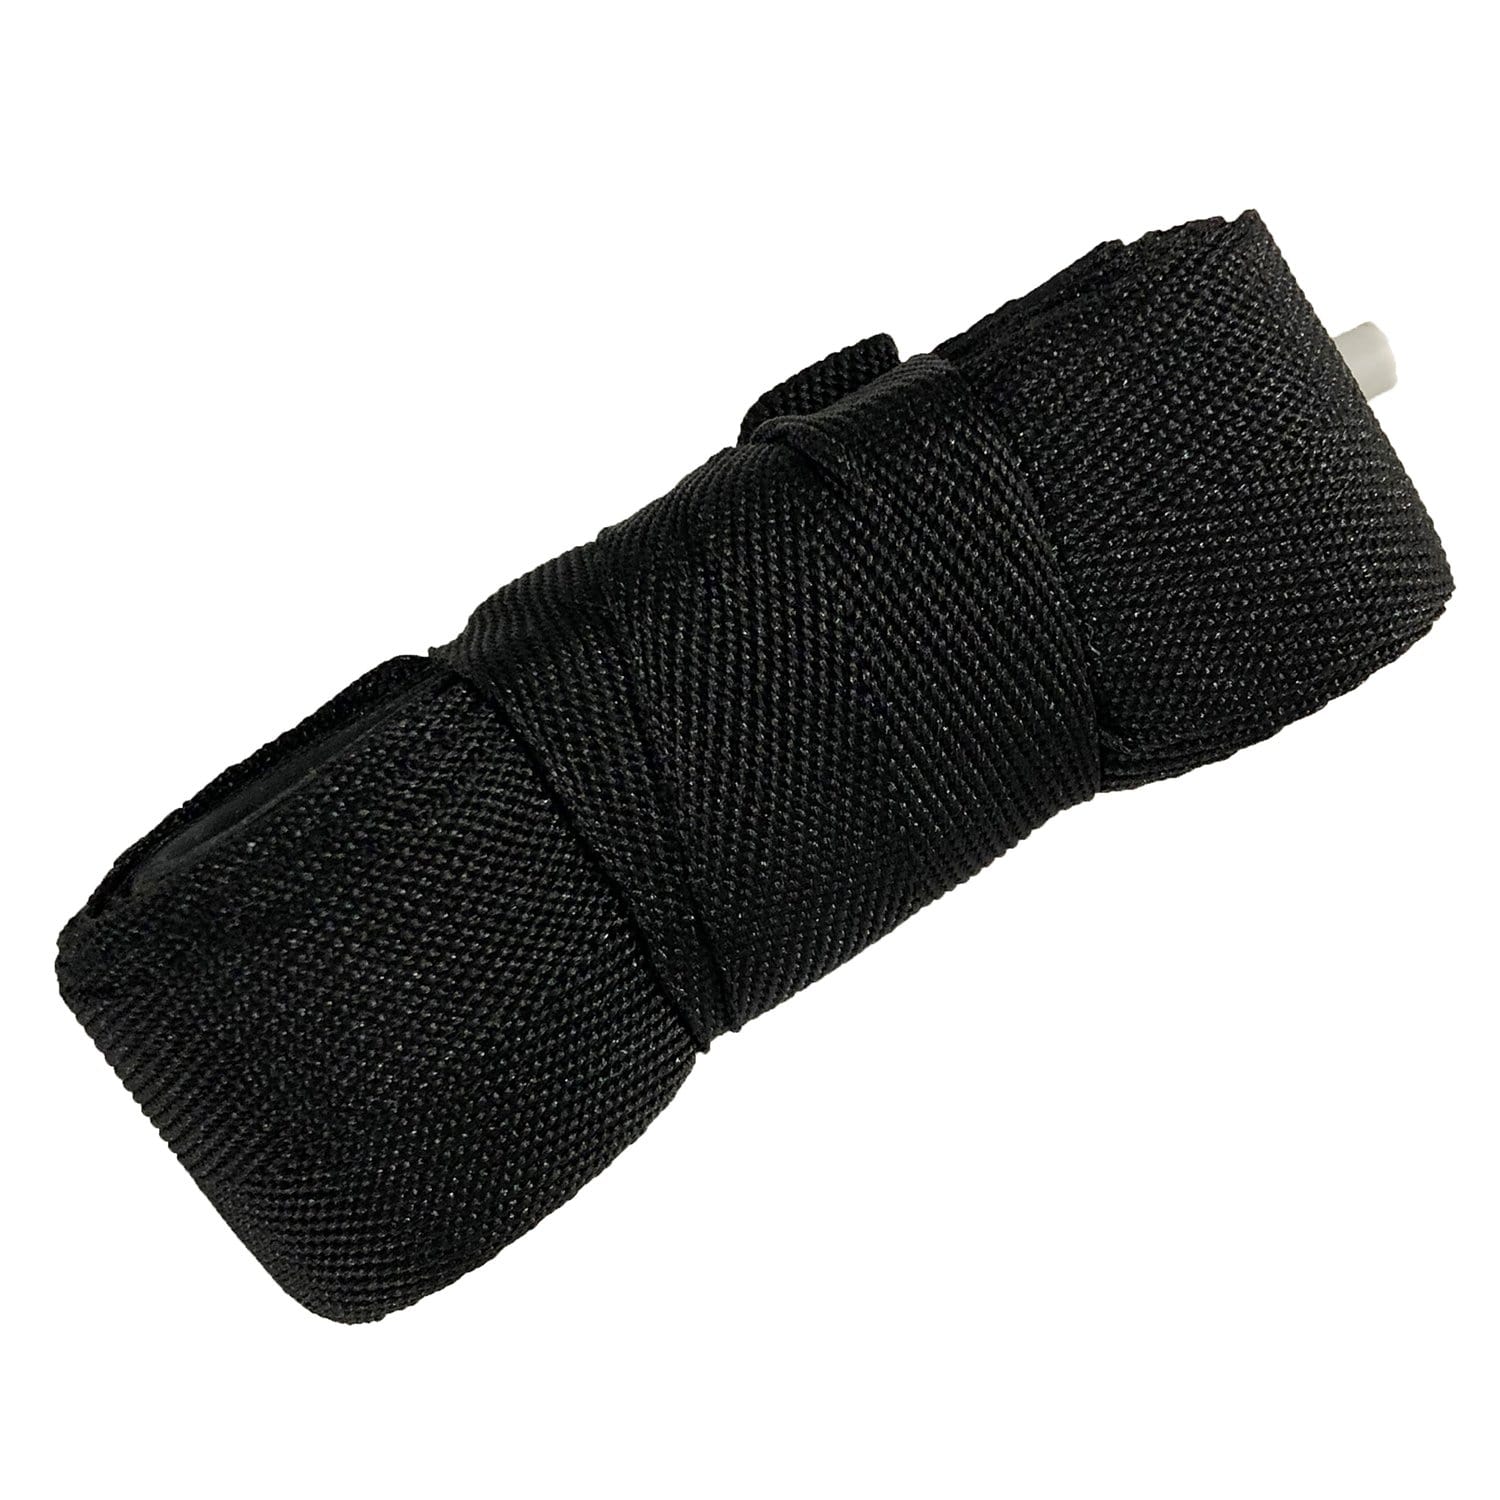 Dometic 940001 Awning Replacement Pull Strap